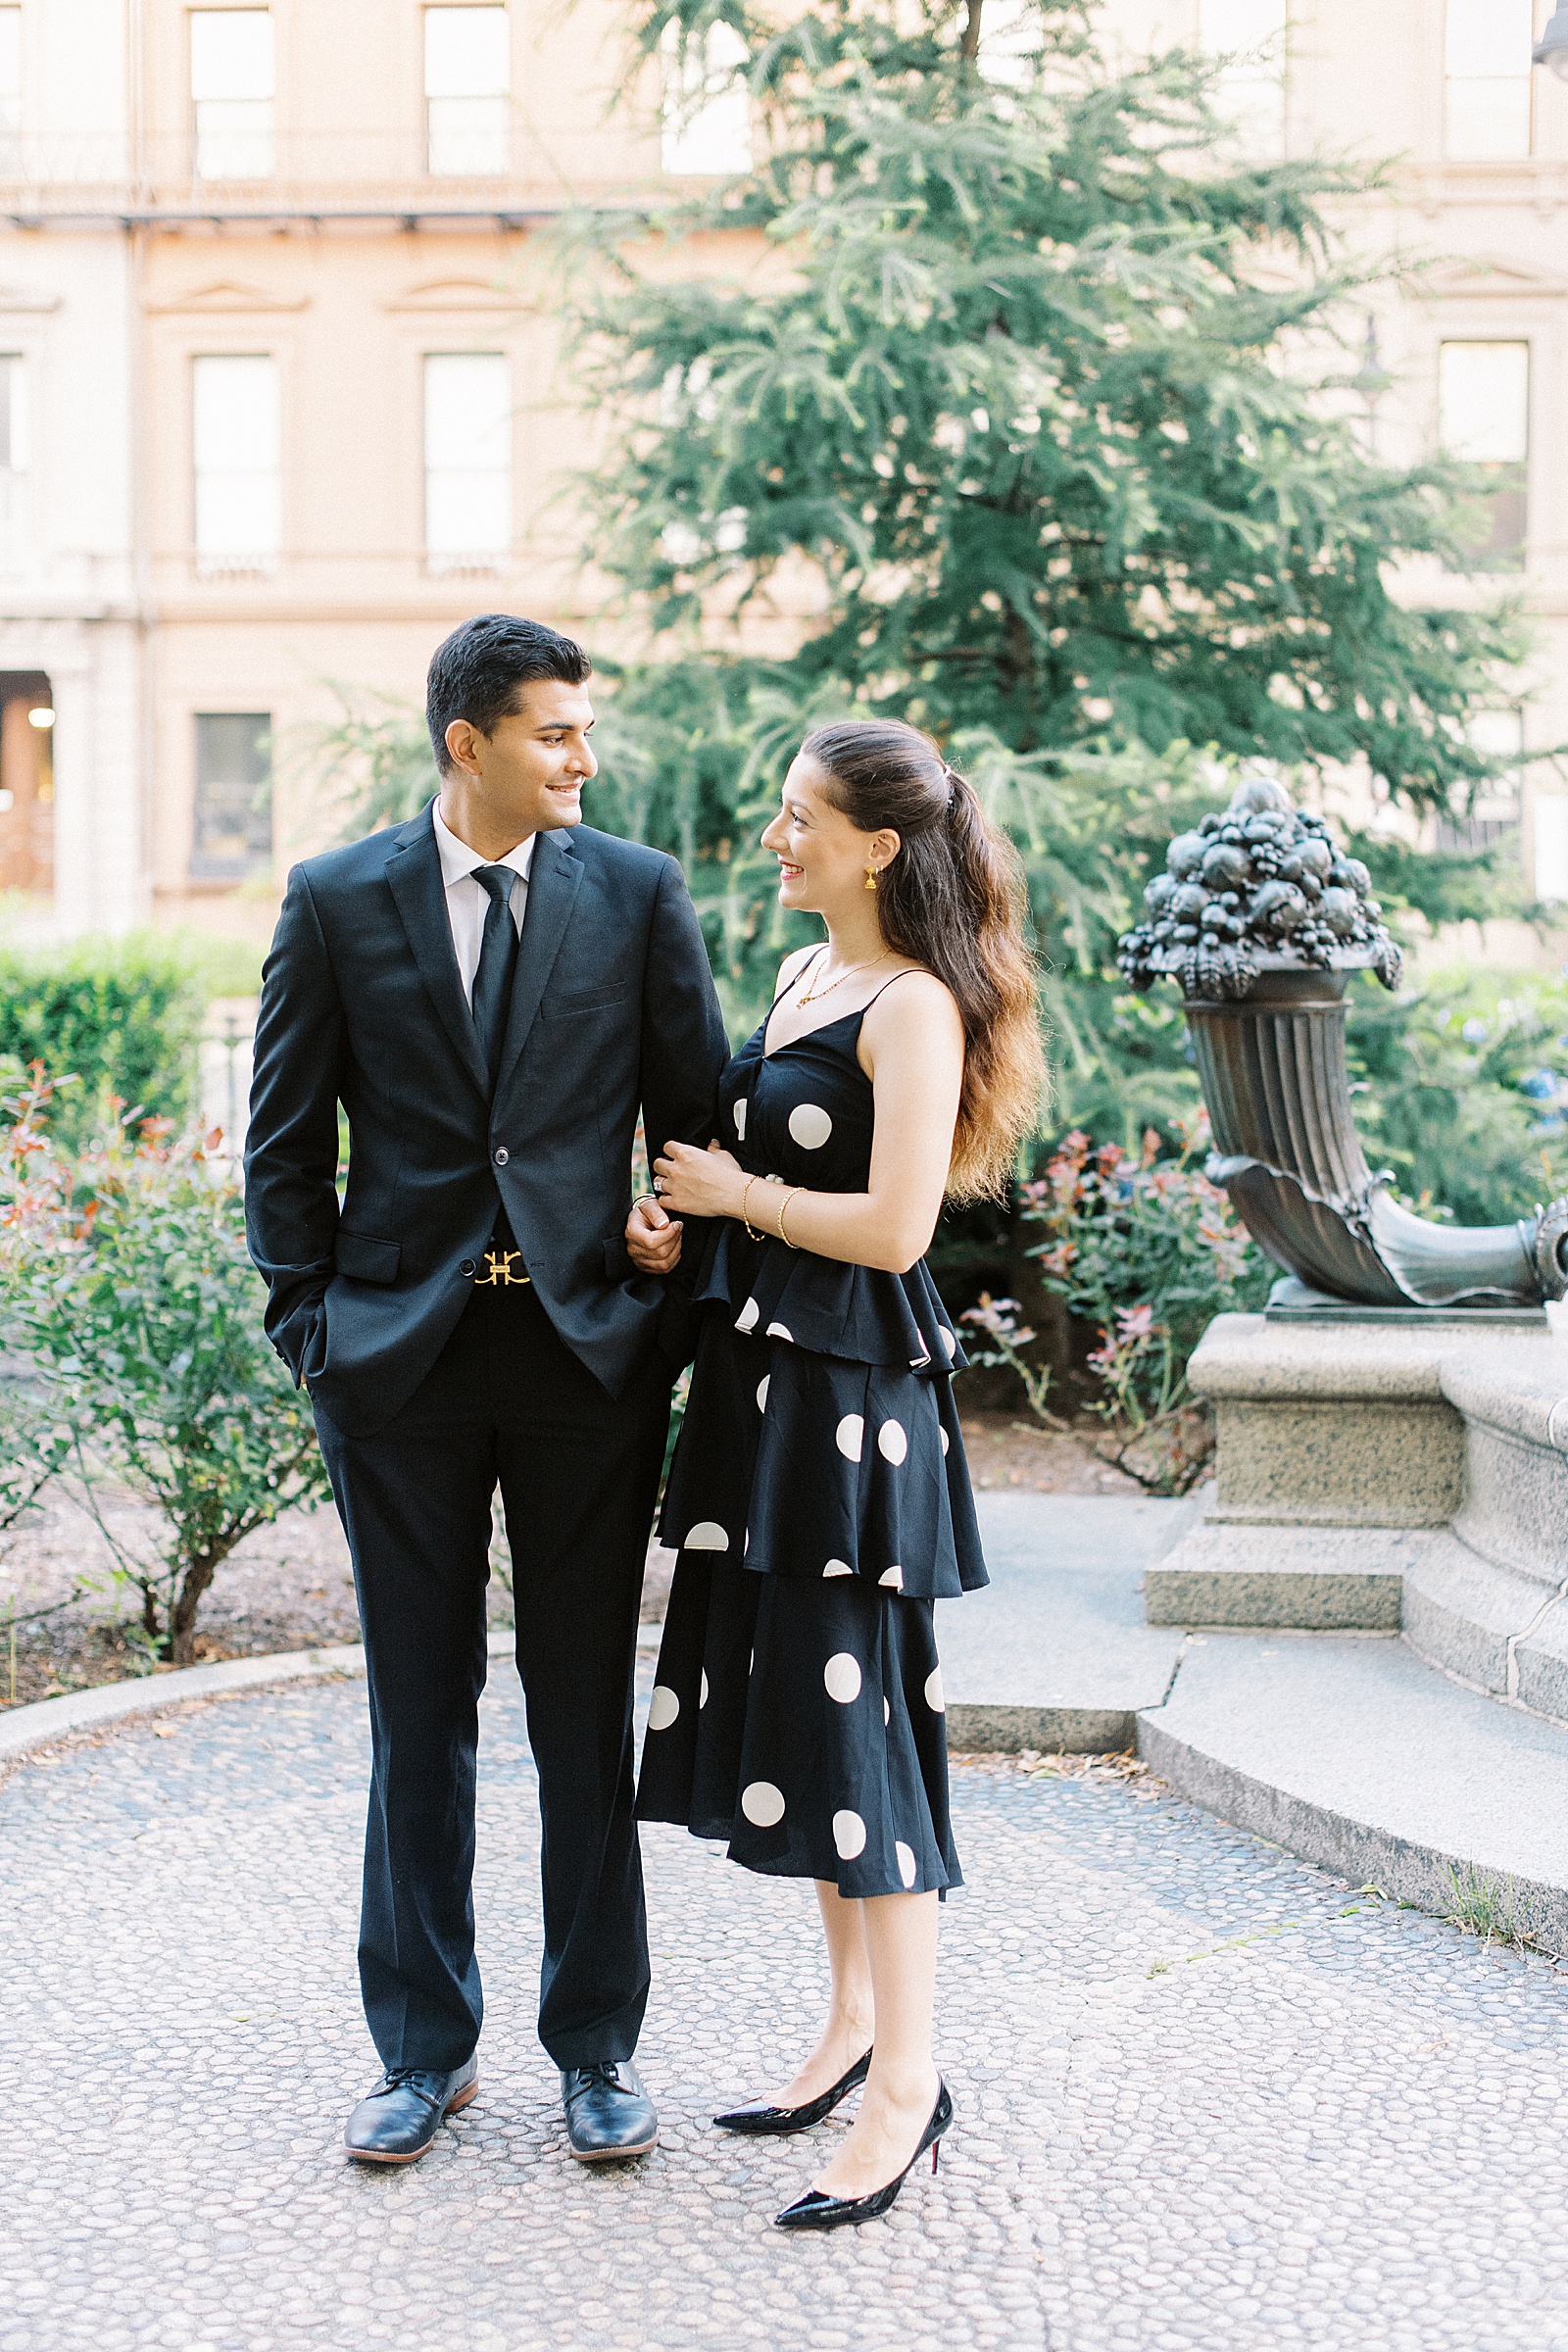 Woman in polka dot dress and man in suit for public garden engagement session